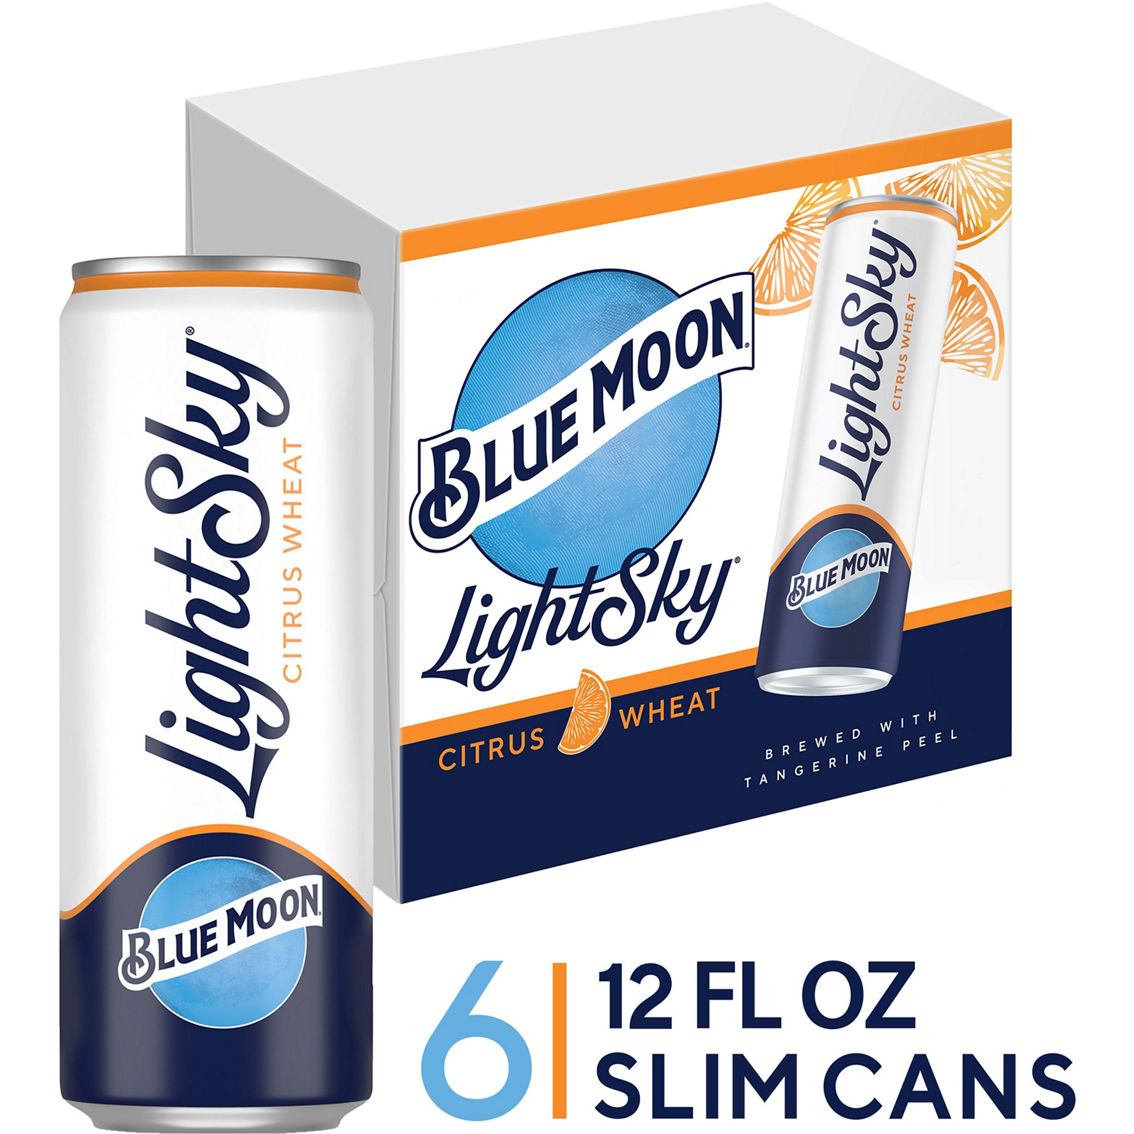 Blue Moon Light Sky Wheat Beer 6 pk., 12 oz. Cans - Image 2 of 2